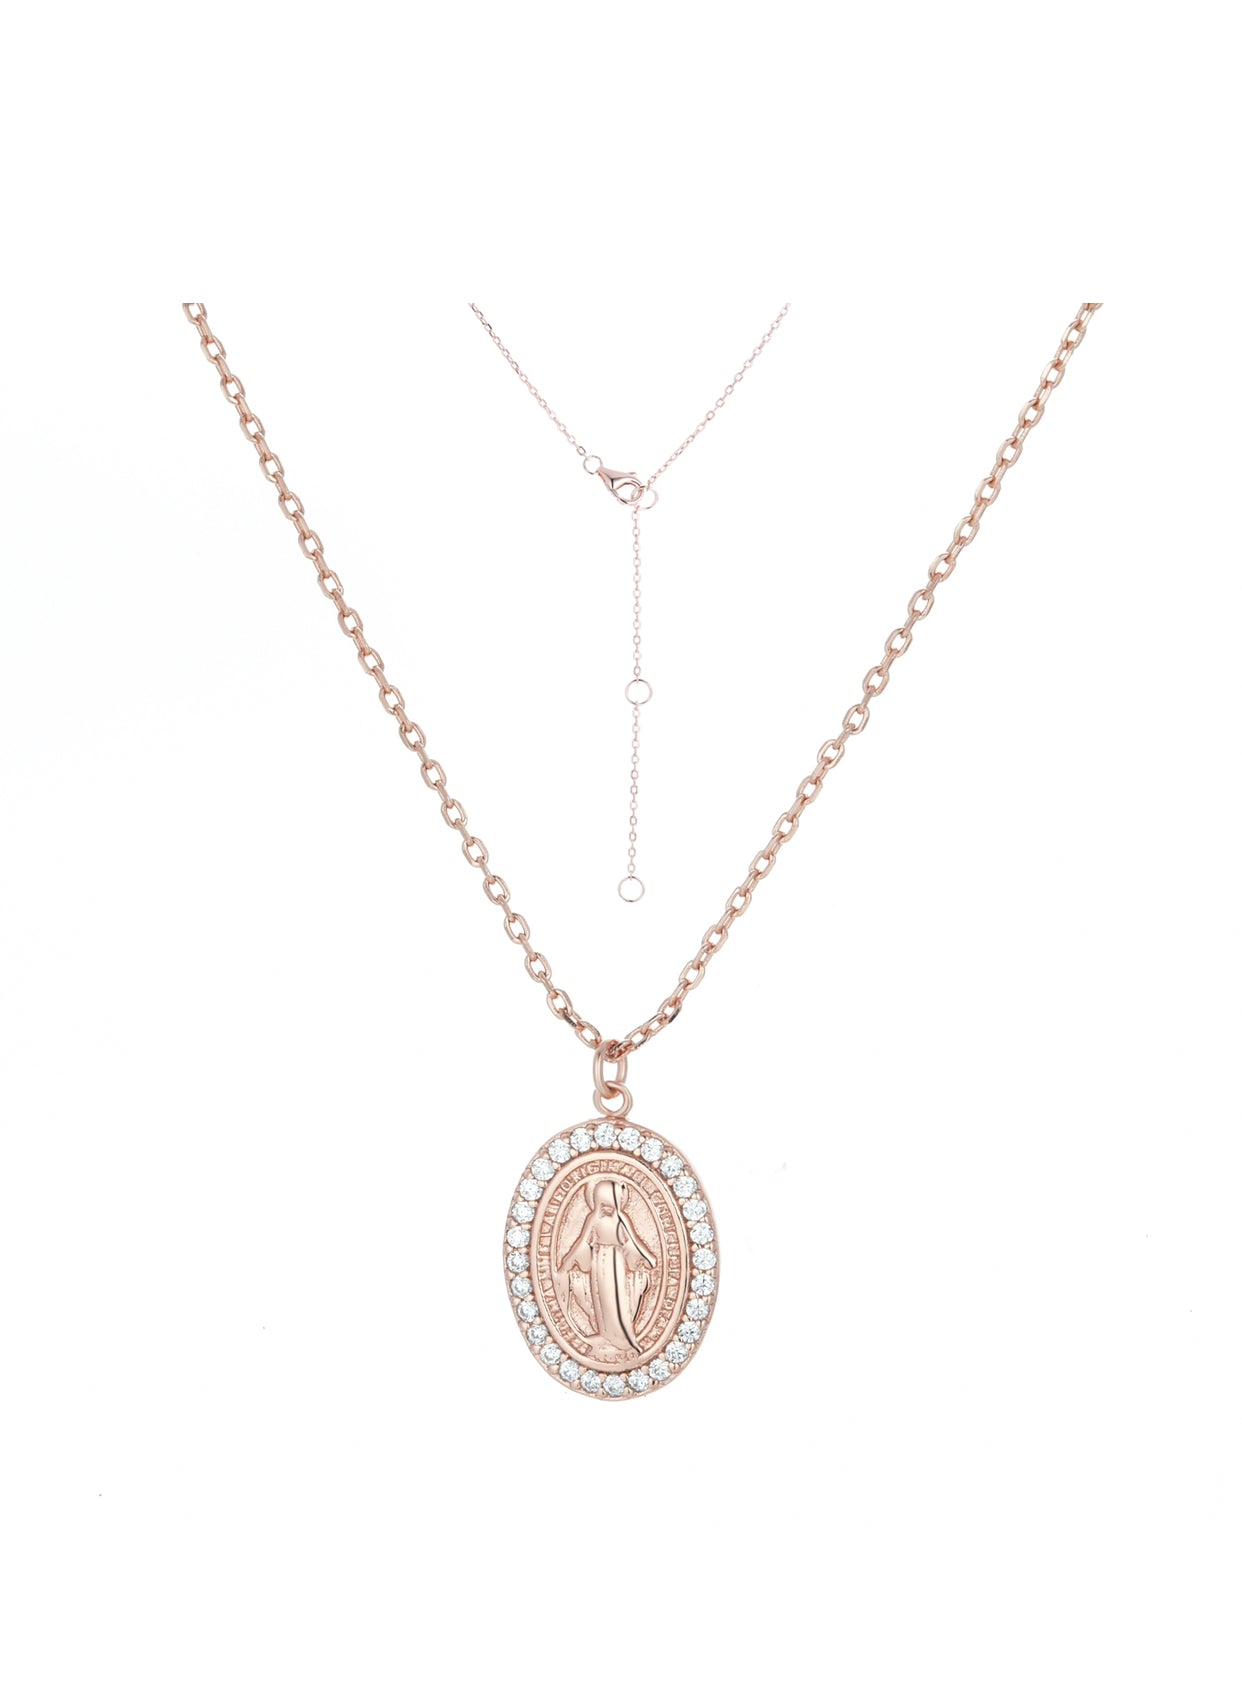 MARY CRYSTAL ROSE GOLD NECKLACE